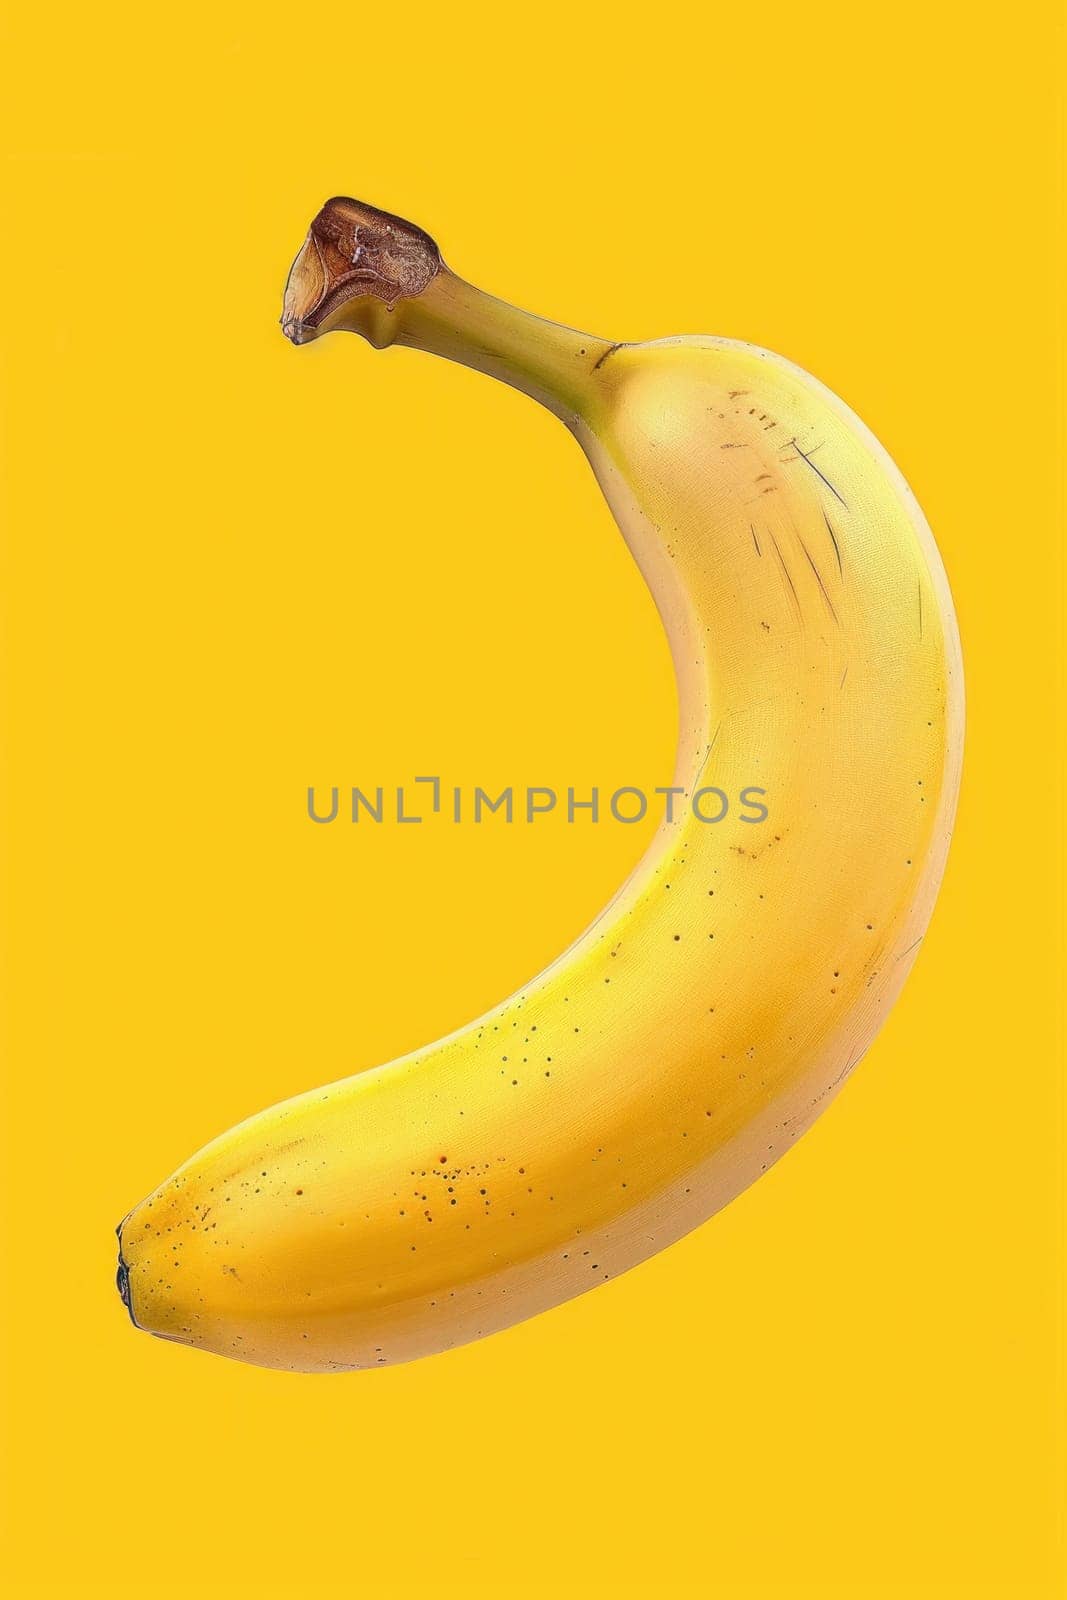 A banana with brown spots on it.